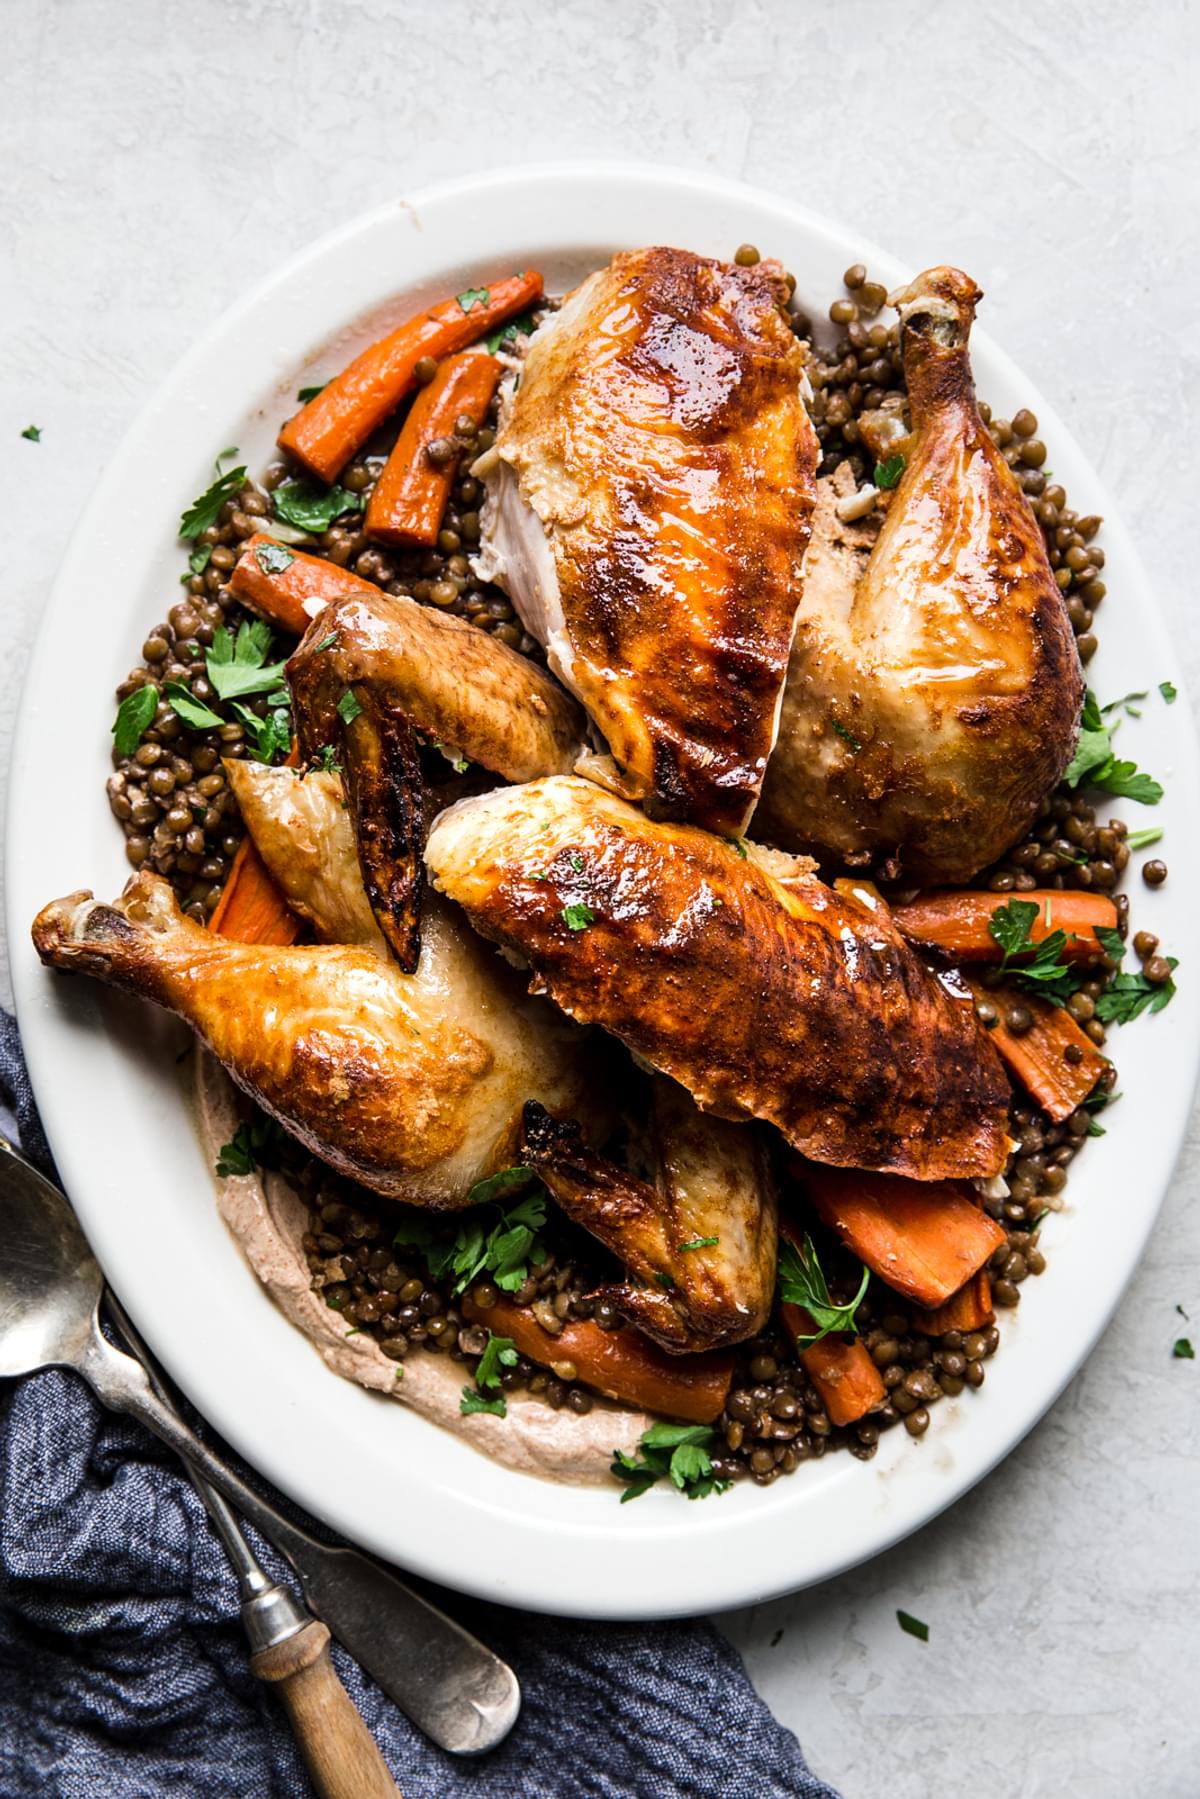 Roast chicken carved and shown on a bed of lentils with roasted carrots, parsley and a yogurt sauce.